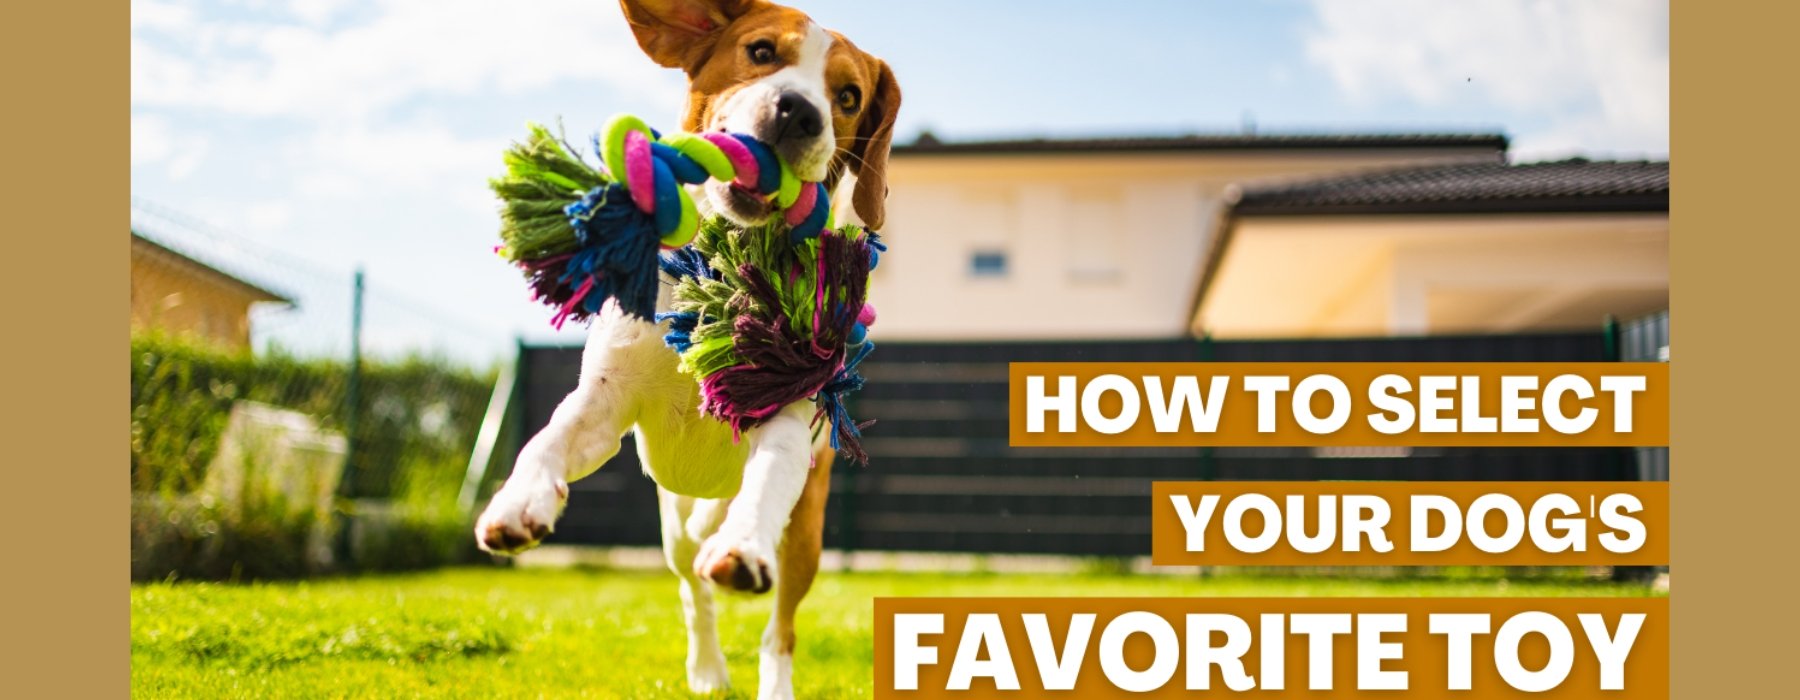 How to Select Your Dog's Favorite Toy - Natural Rubber Toys